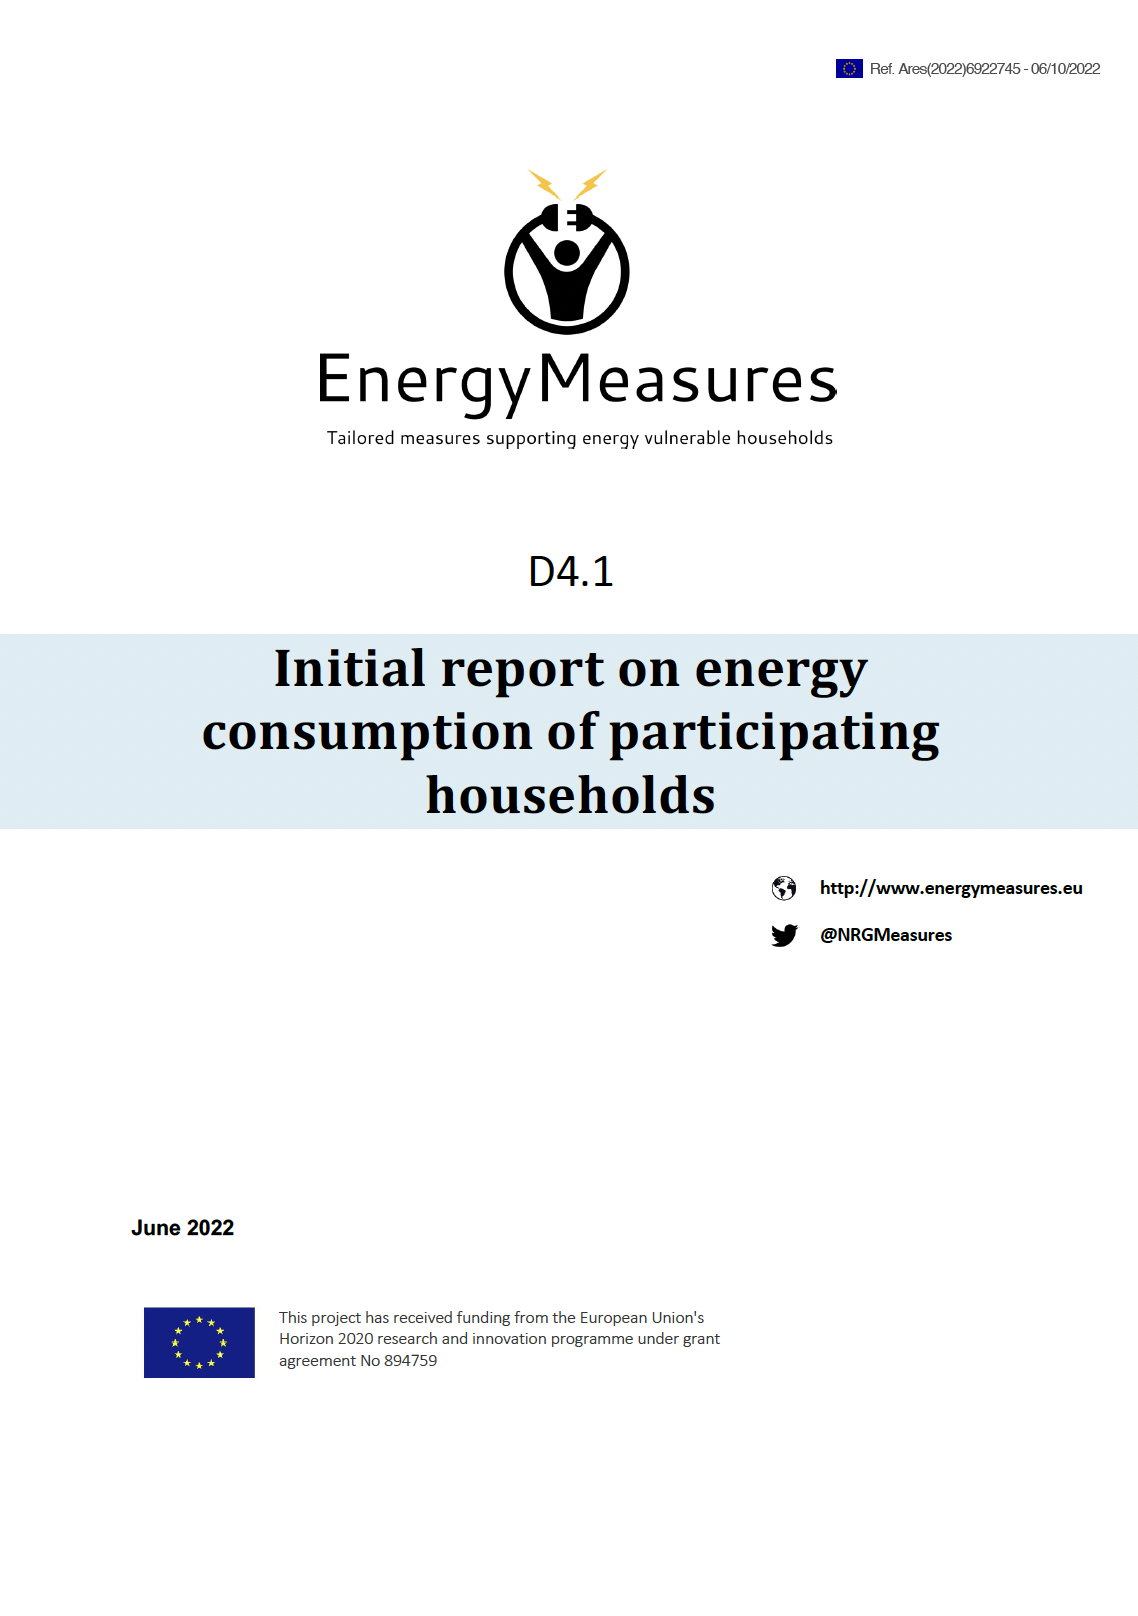 D4.1 Initial report on energy consumption of participating households